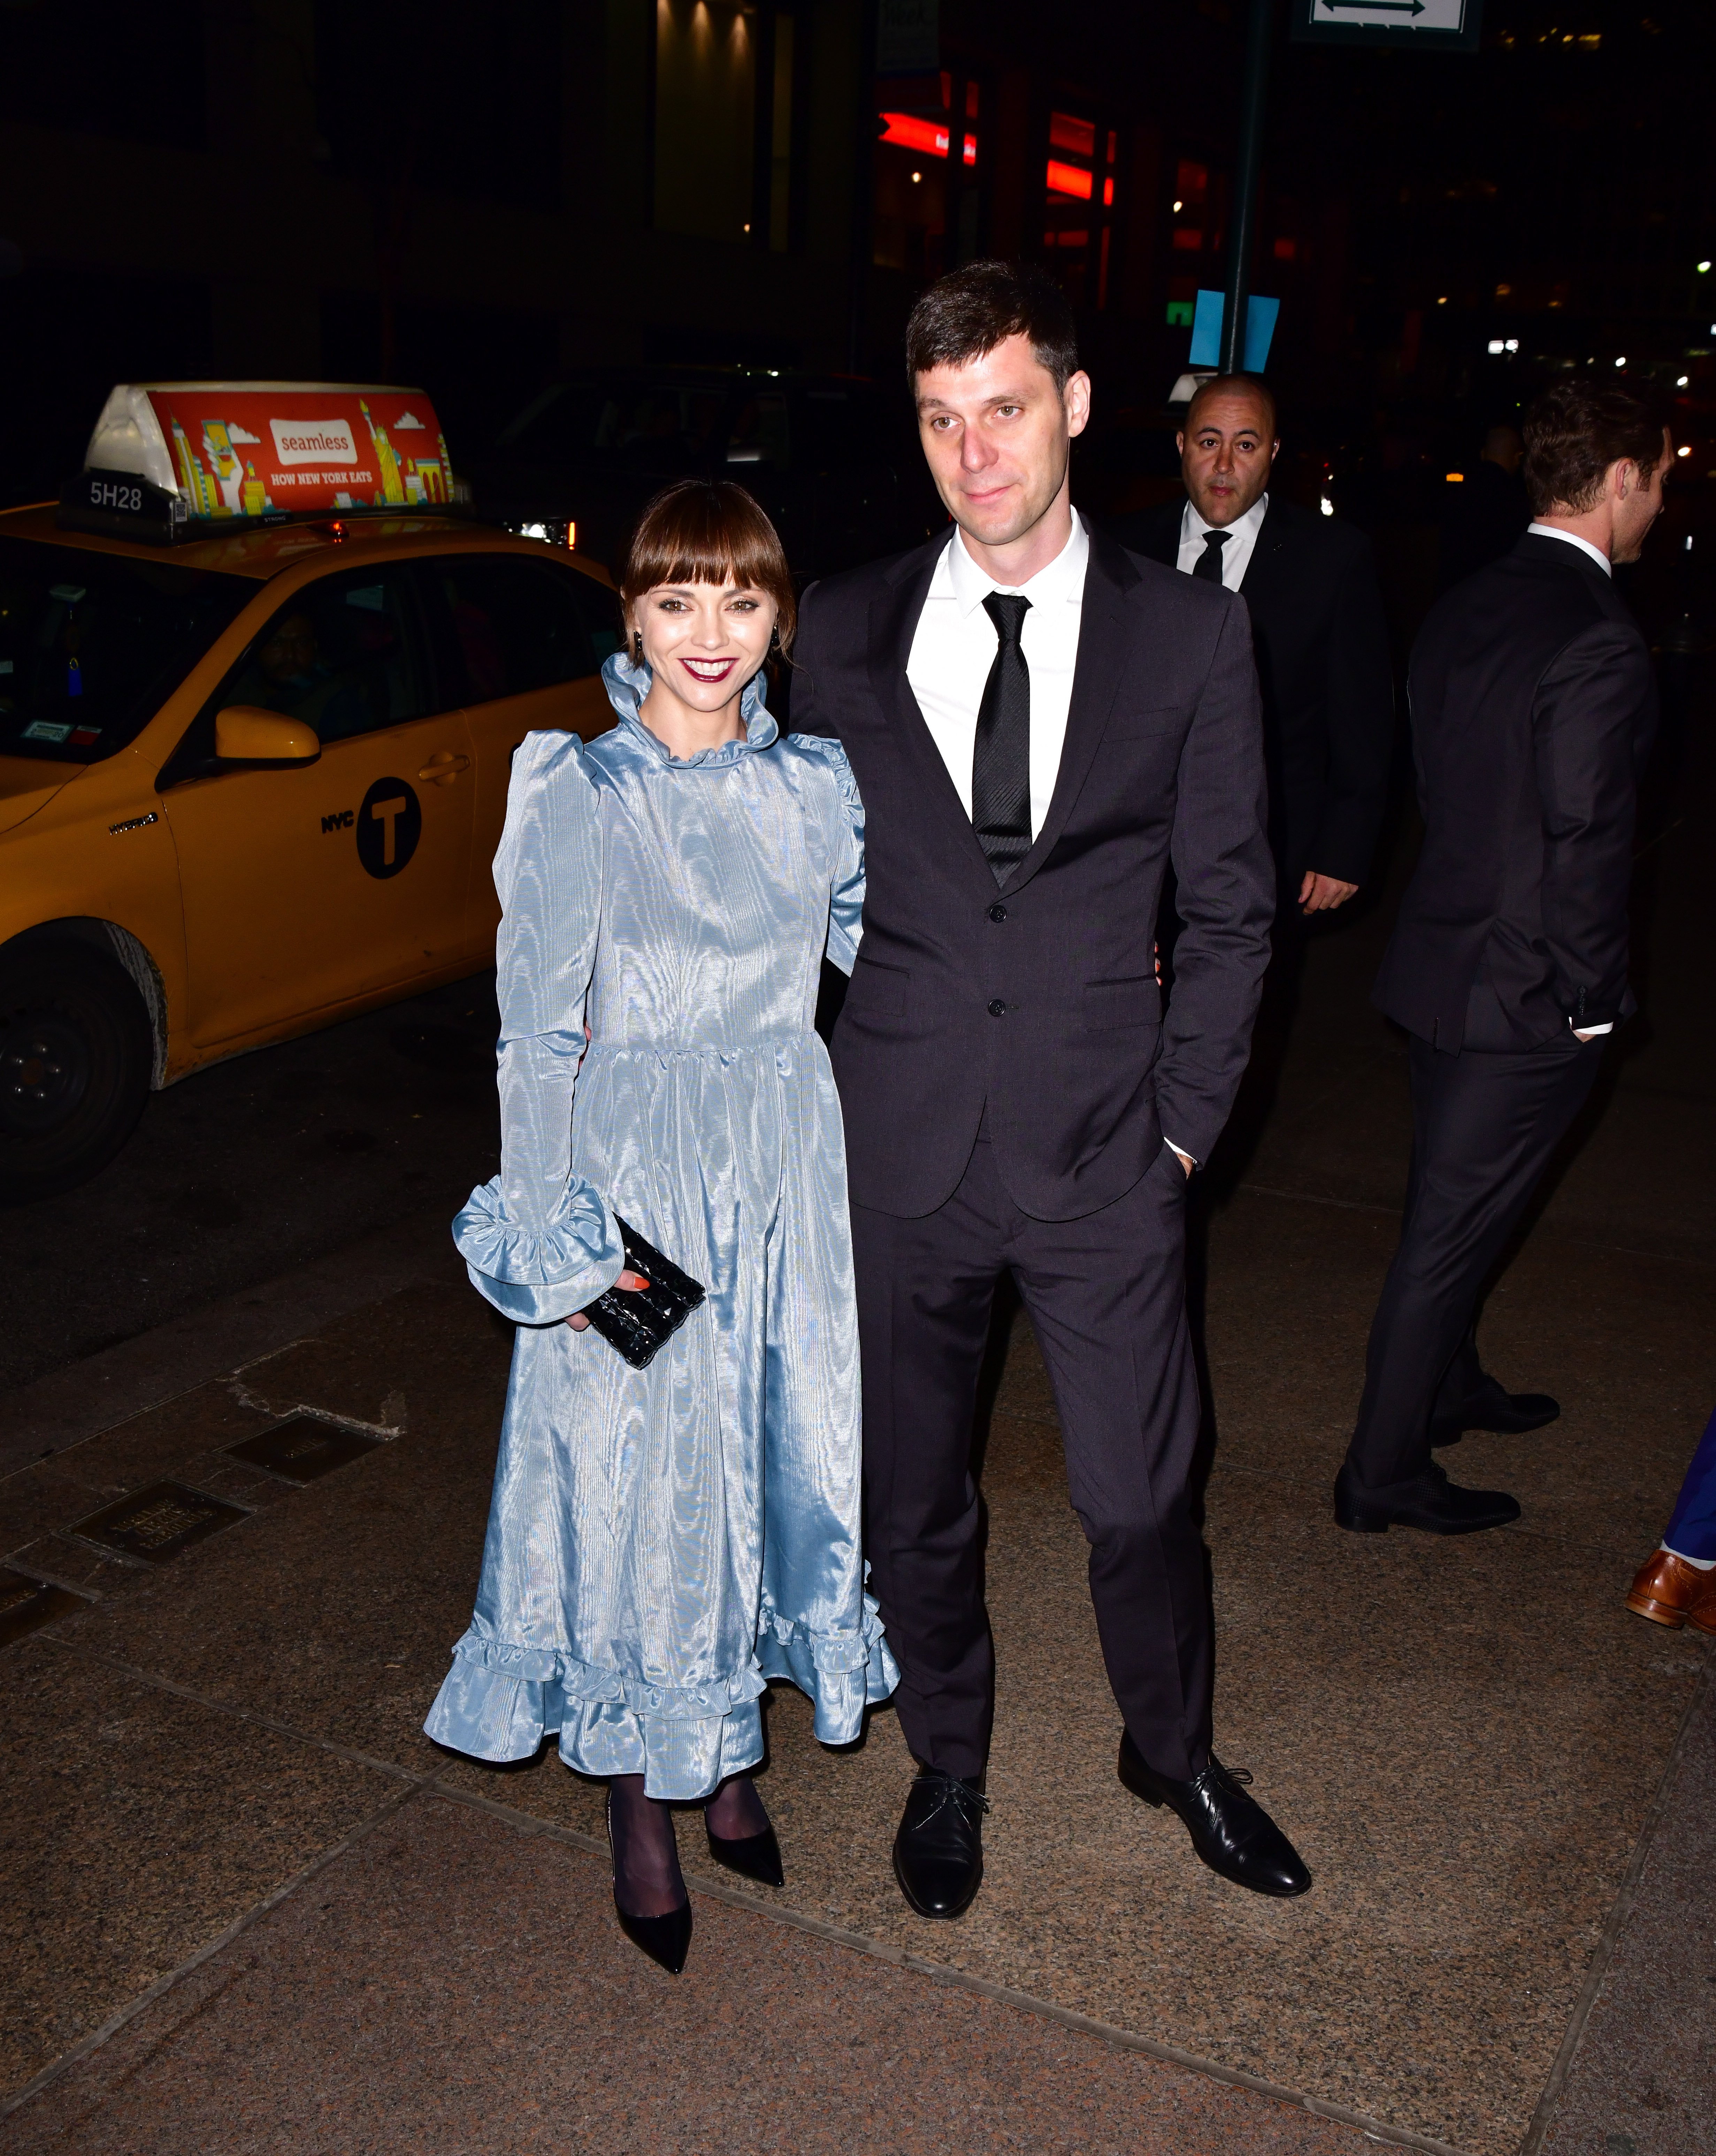 Christina Ricci and James Heerdegen arrive at the wedding reception for Char Defrancesco and Marc Jacobs at The Grill and The Pool on April 6, 2019, in New York City. | Source: Getty Images